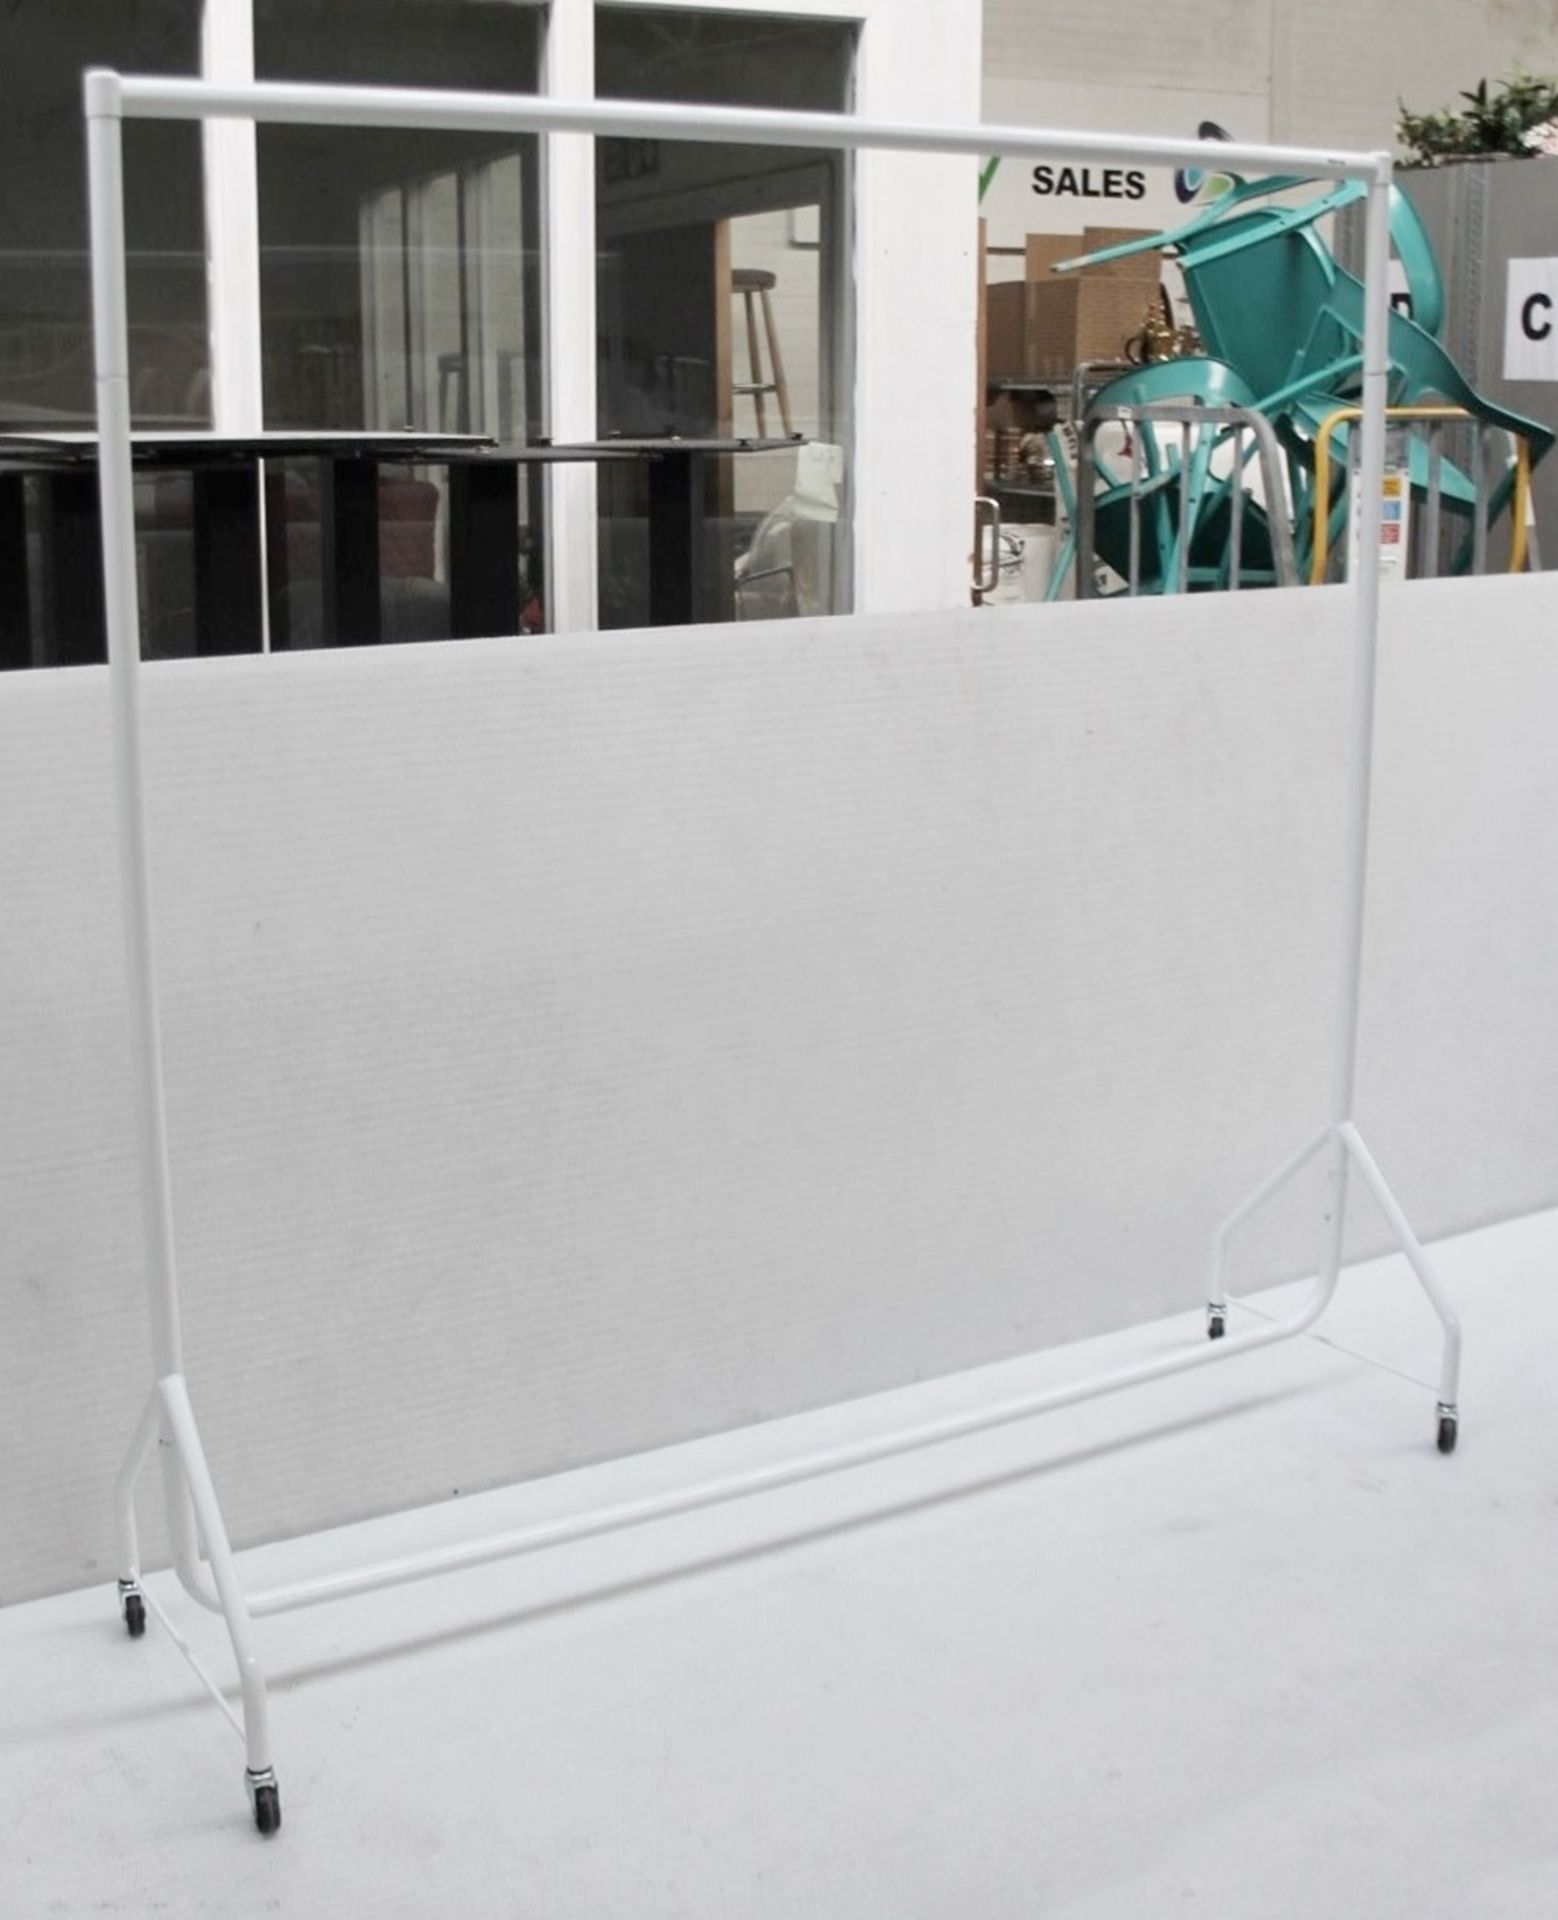 A Pair Of Tall Garment Rails In White - Recently Removed From A Designer Bridal Boutique - Image 2 of 4